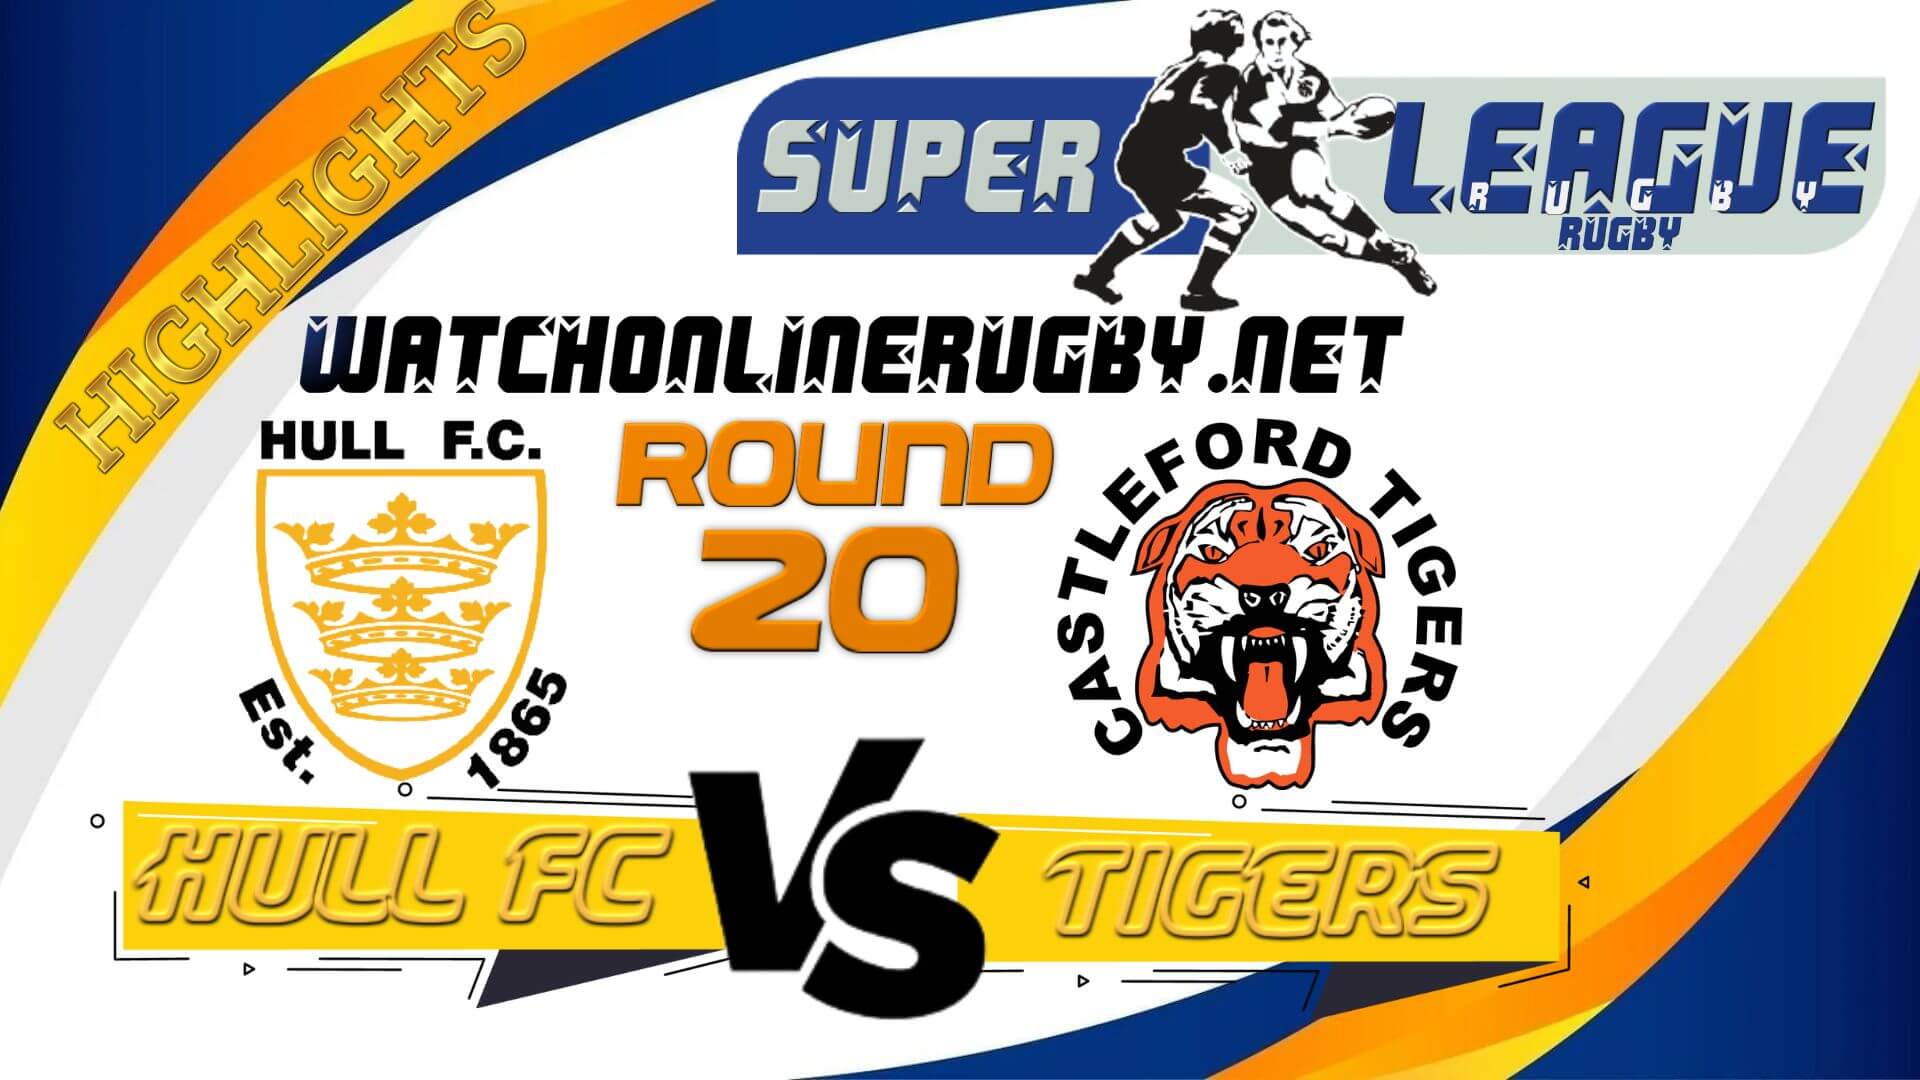 Hull FC Vs Castleford Tigers Super League Rugby 2022 RD 20